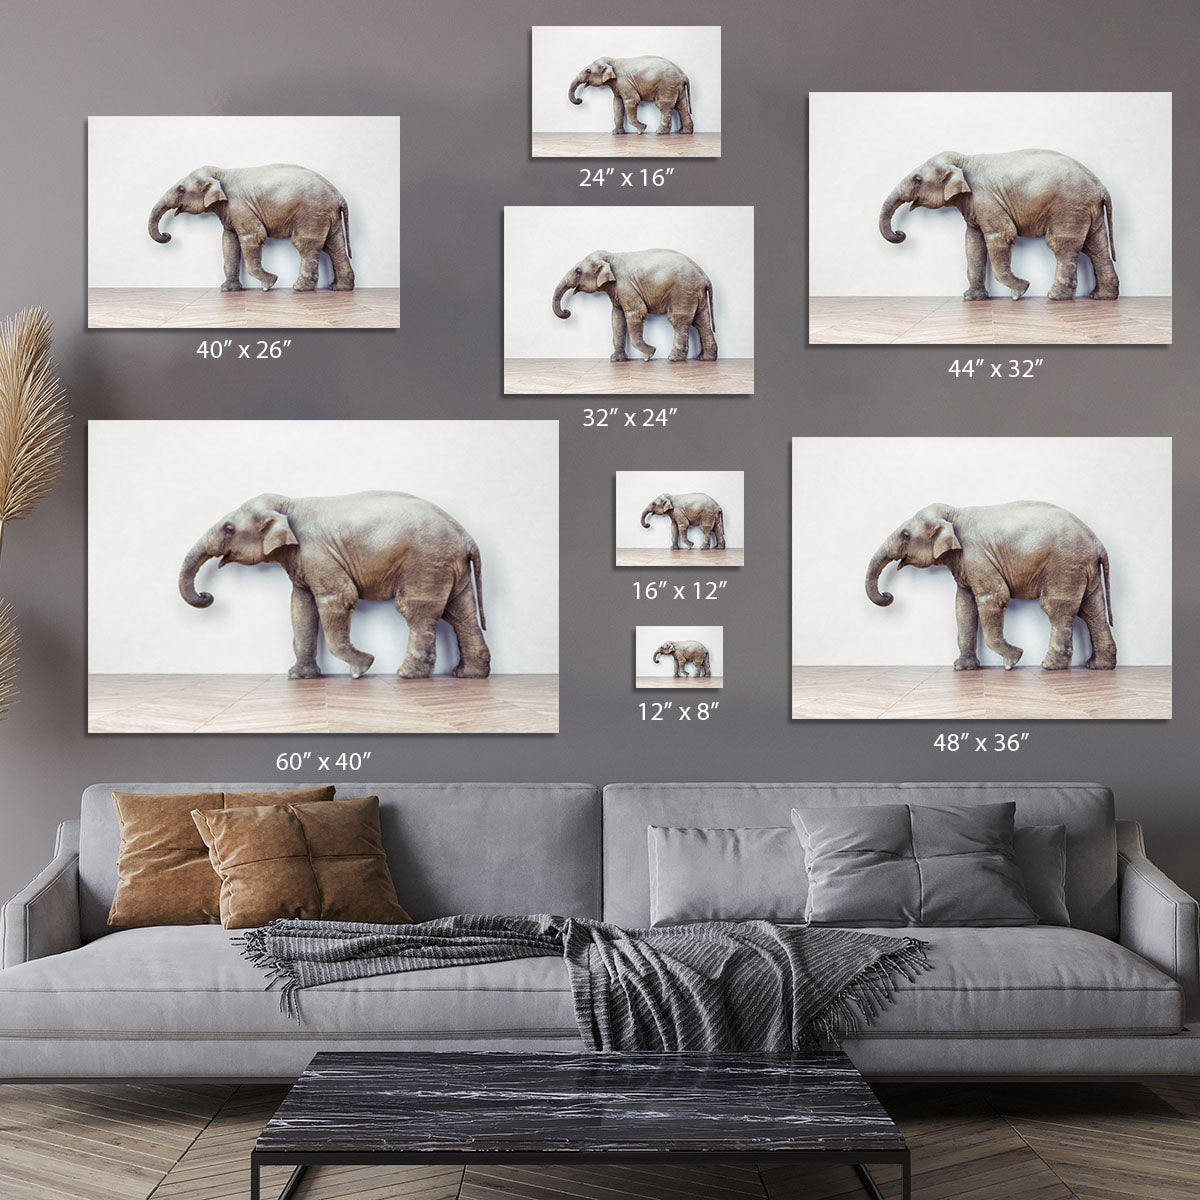 The elephant calm in the room near white wall Canvas Print or Poster - Canvas Art Rocks - 7